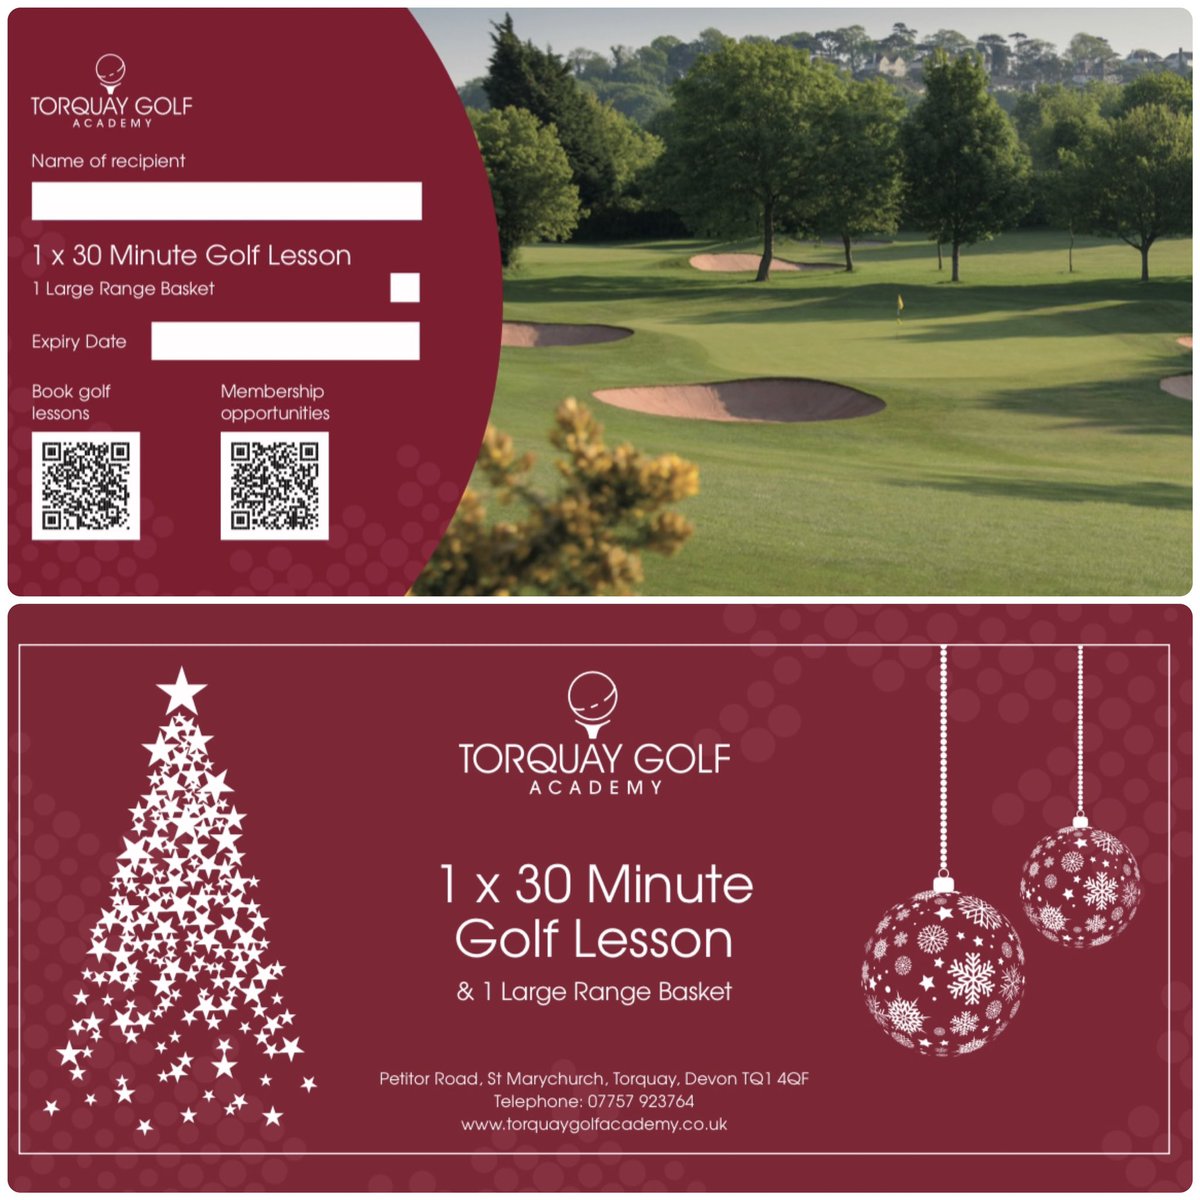 We have some exceptional Christmas Coaching deals this festive season. Our top package includes 4 lessons, 4 Large Range baskets, & golf for 2 at Torquay Golf Club all for the price of £120! 🎄🎅🏻 Click below to visit our Christmas Store: torquaygolfacademy.co.uk/christmasstore